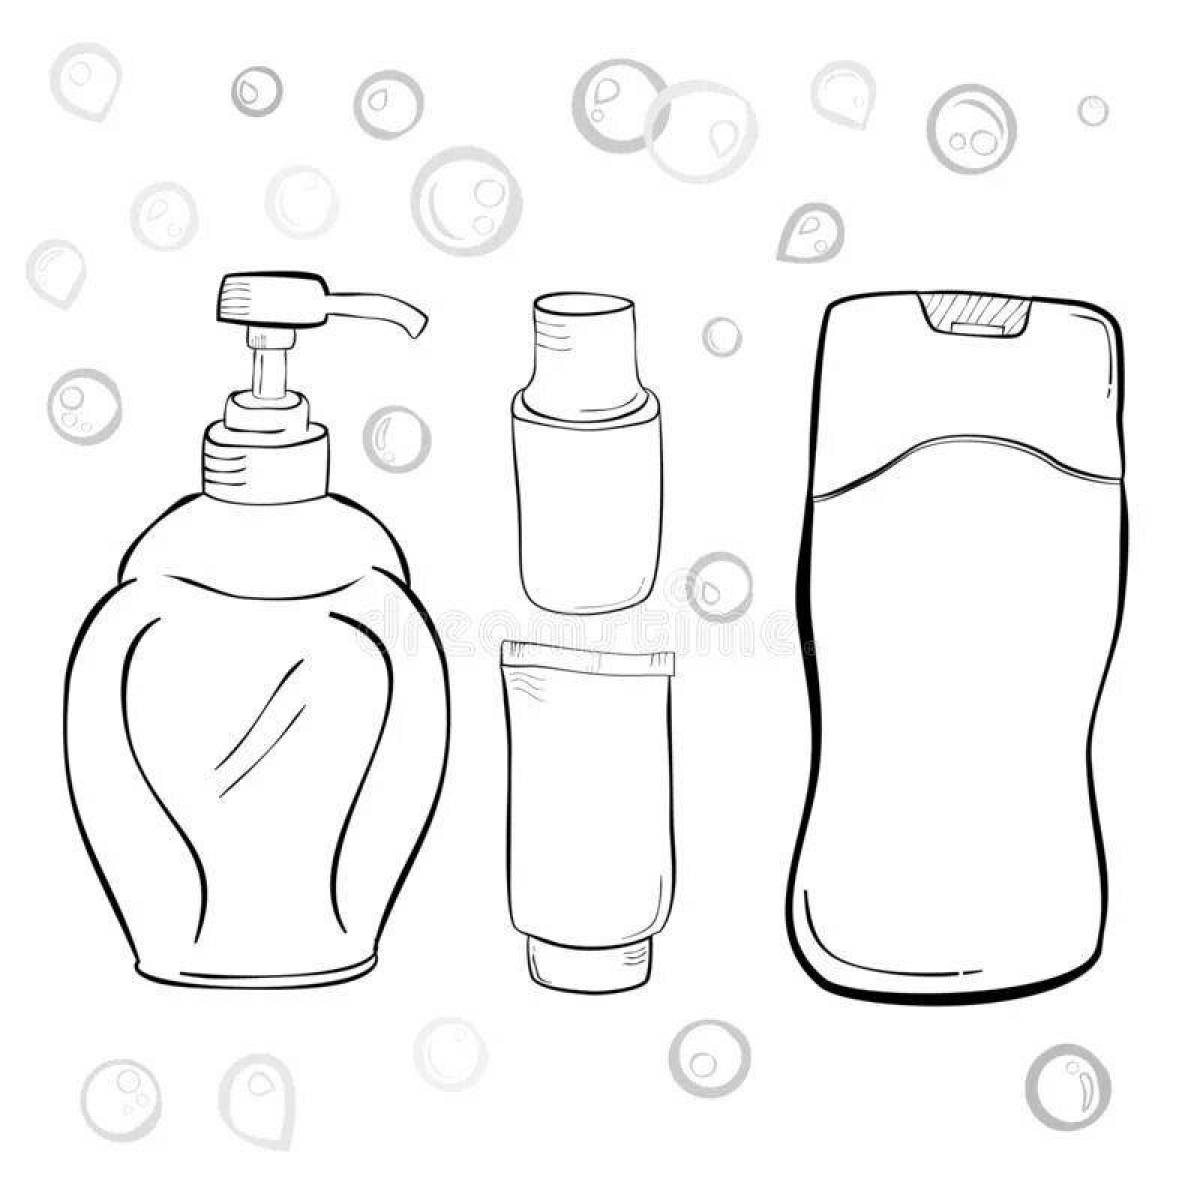 Glowing Shampoo Coloring Page